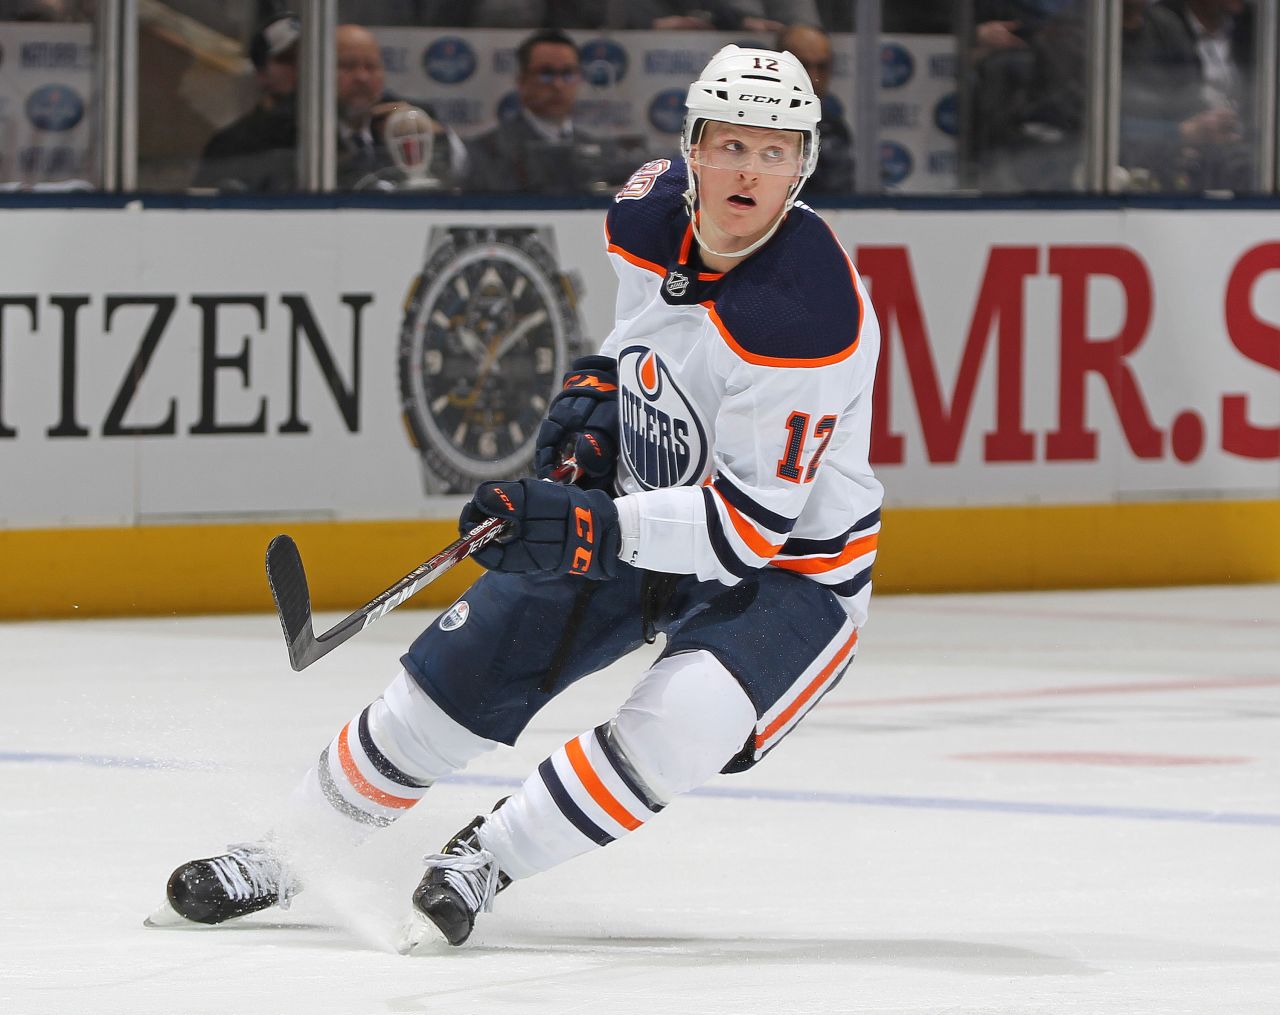 NHL center <a href="https://www.cnn.com/2020/04/11/sport/colby-cave-dead-nhl-edmonton-oilers-trnd/index.html" target="_blank">Colby Cave</a>, who played for the Edmonton Oilers and the Boston Bruins, died April 11 at the age of 25. He died days after doctors operated on him to remove a colloid cyst that was putting pressure on his brain, according to NHL.com. He had been in a medically induced coma since suffering a brain bleed overnight.